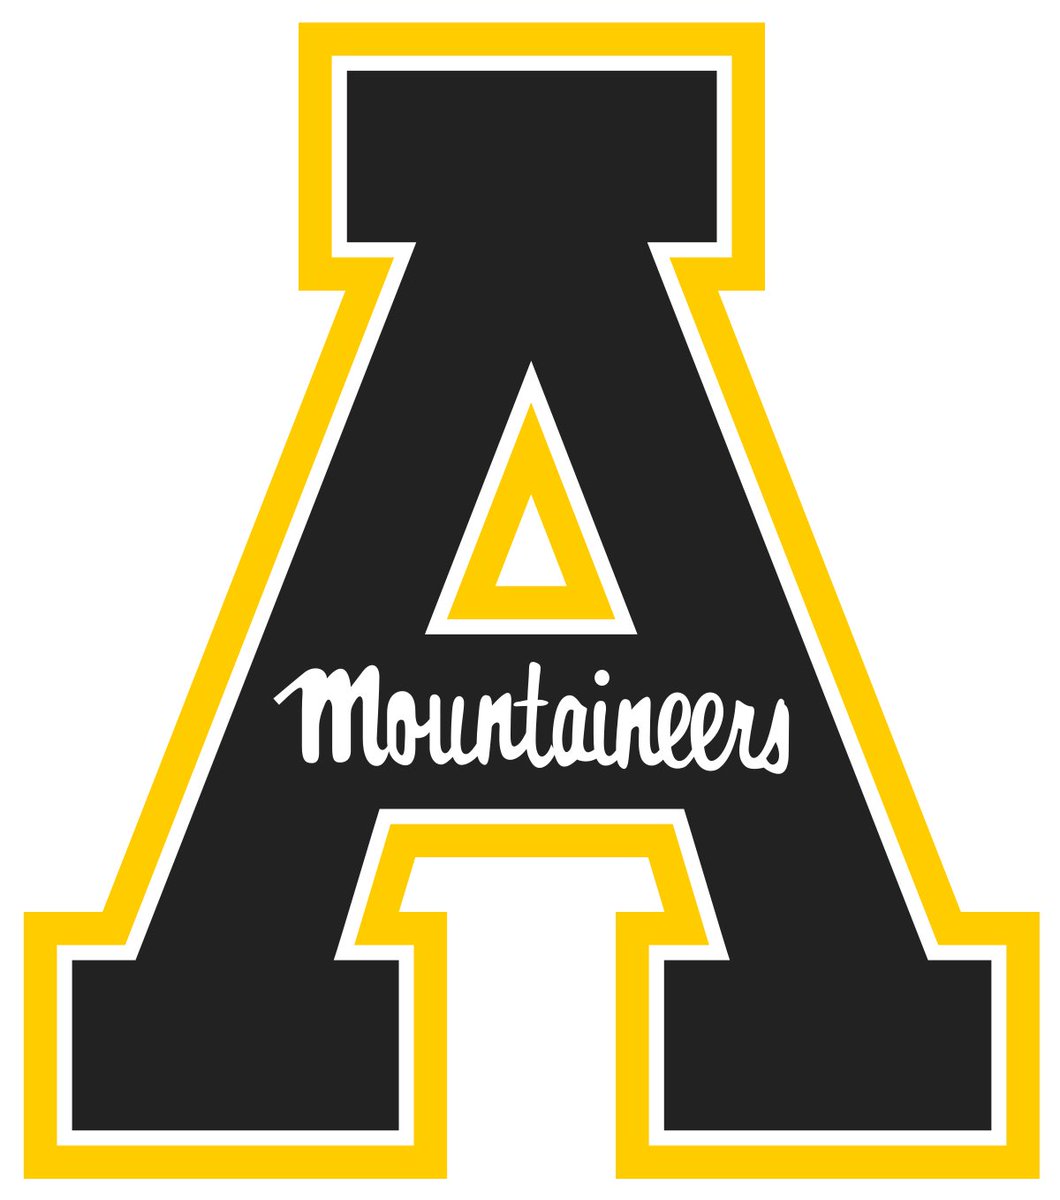 #AGTG After a great conversation with @CoachFrankPonce I am blessed to receive an offer from APP State! ⚫️🟡 @coach_sclark @CoachAlecCobb @jakeganus @MoodyFBall @QBC_Bham @QBCountry @_SouthernXpress